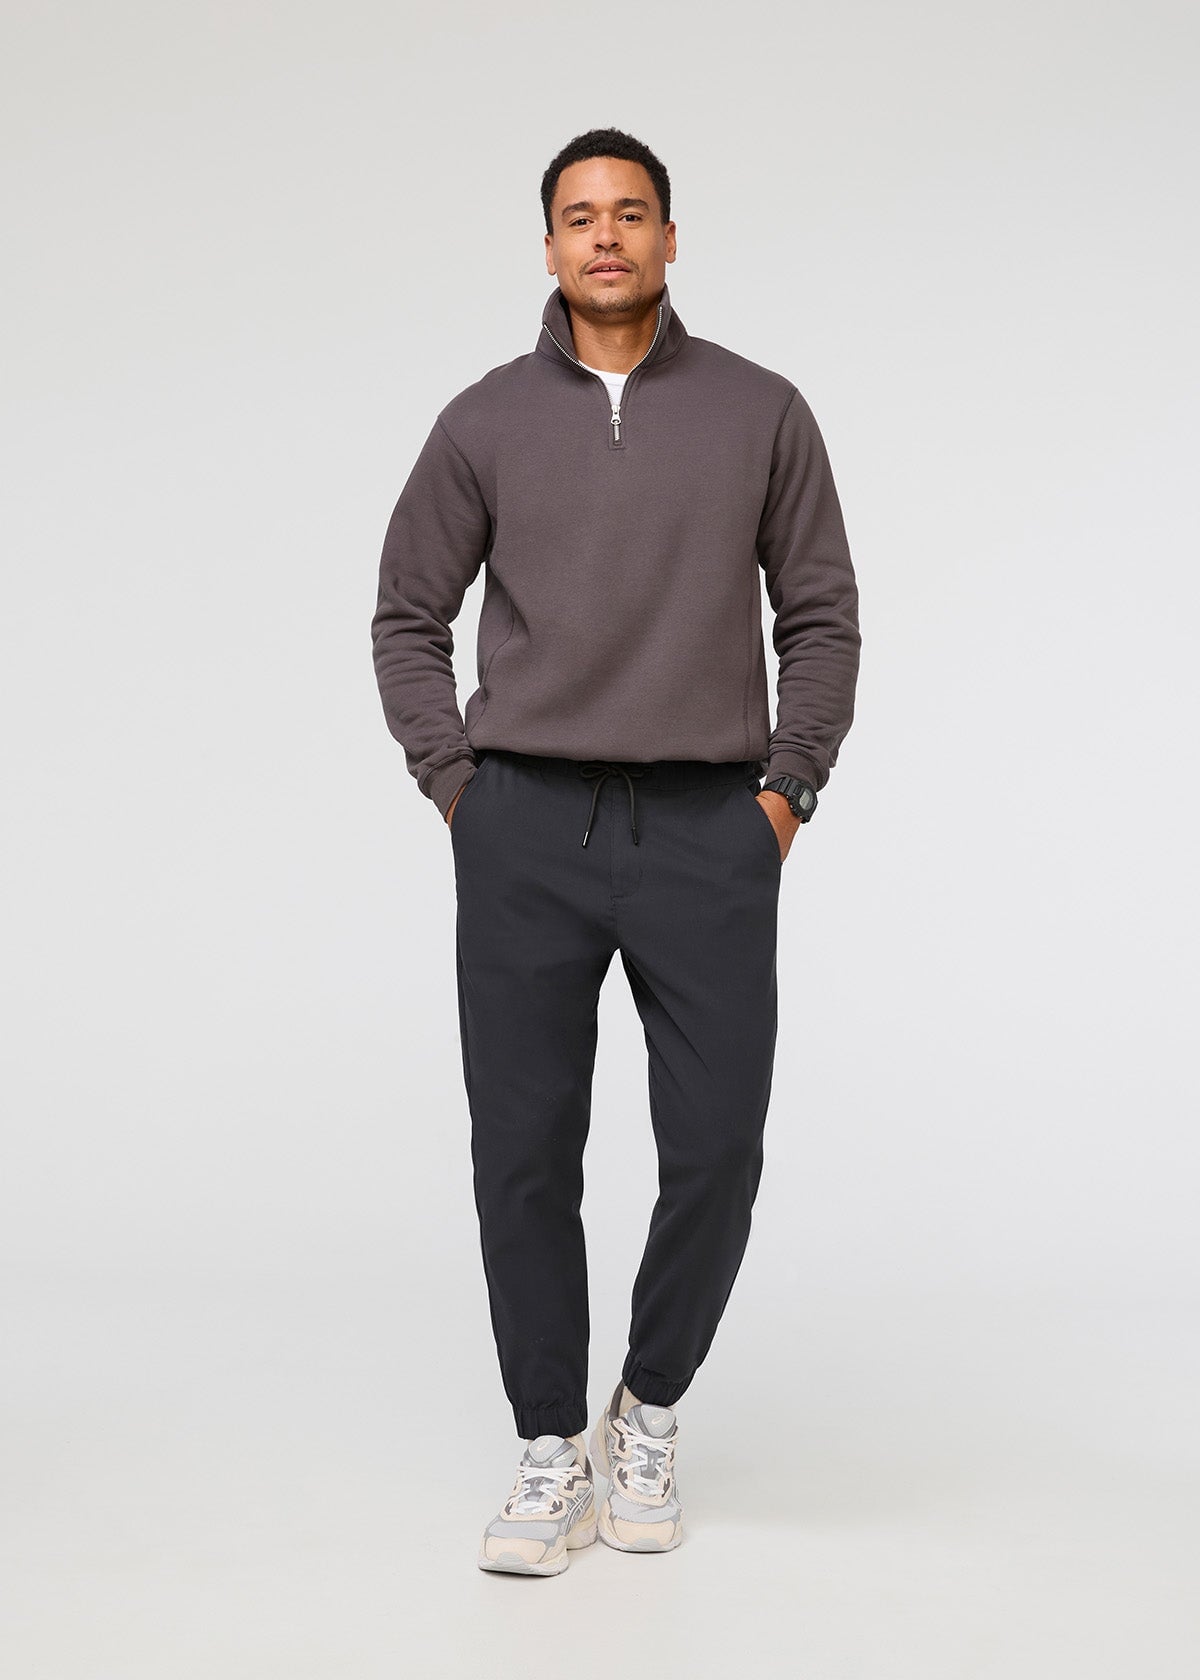 Athleisure Joggers for Men: Buy Athleisure Track Pants for Men Online at  Best Price